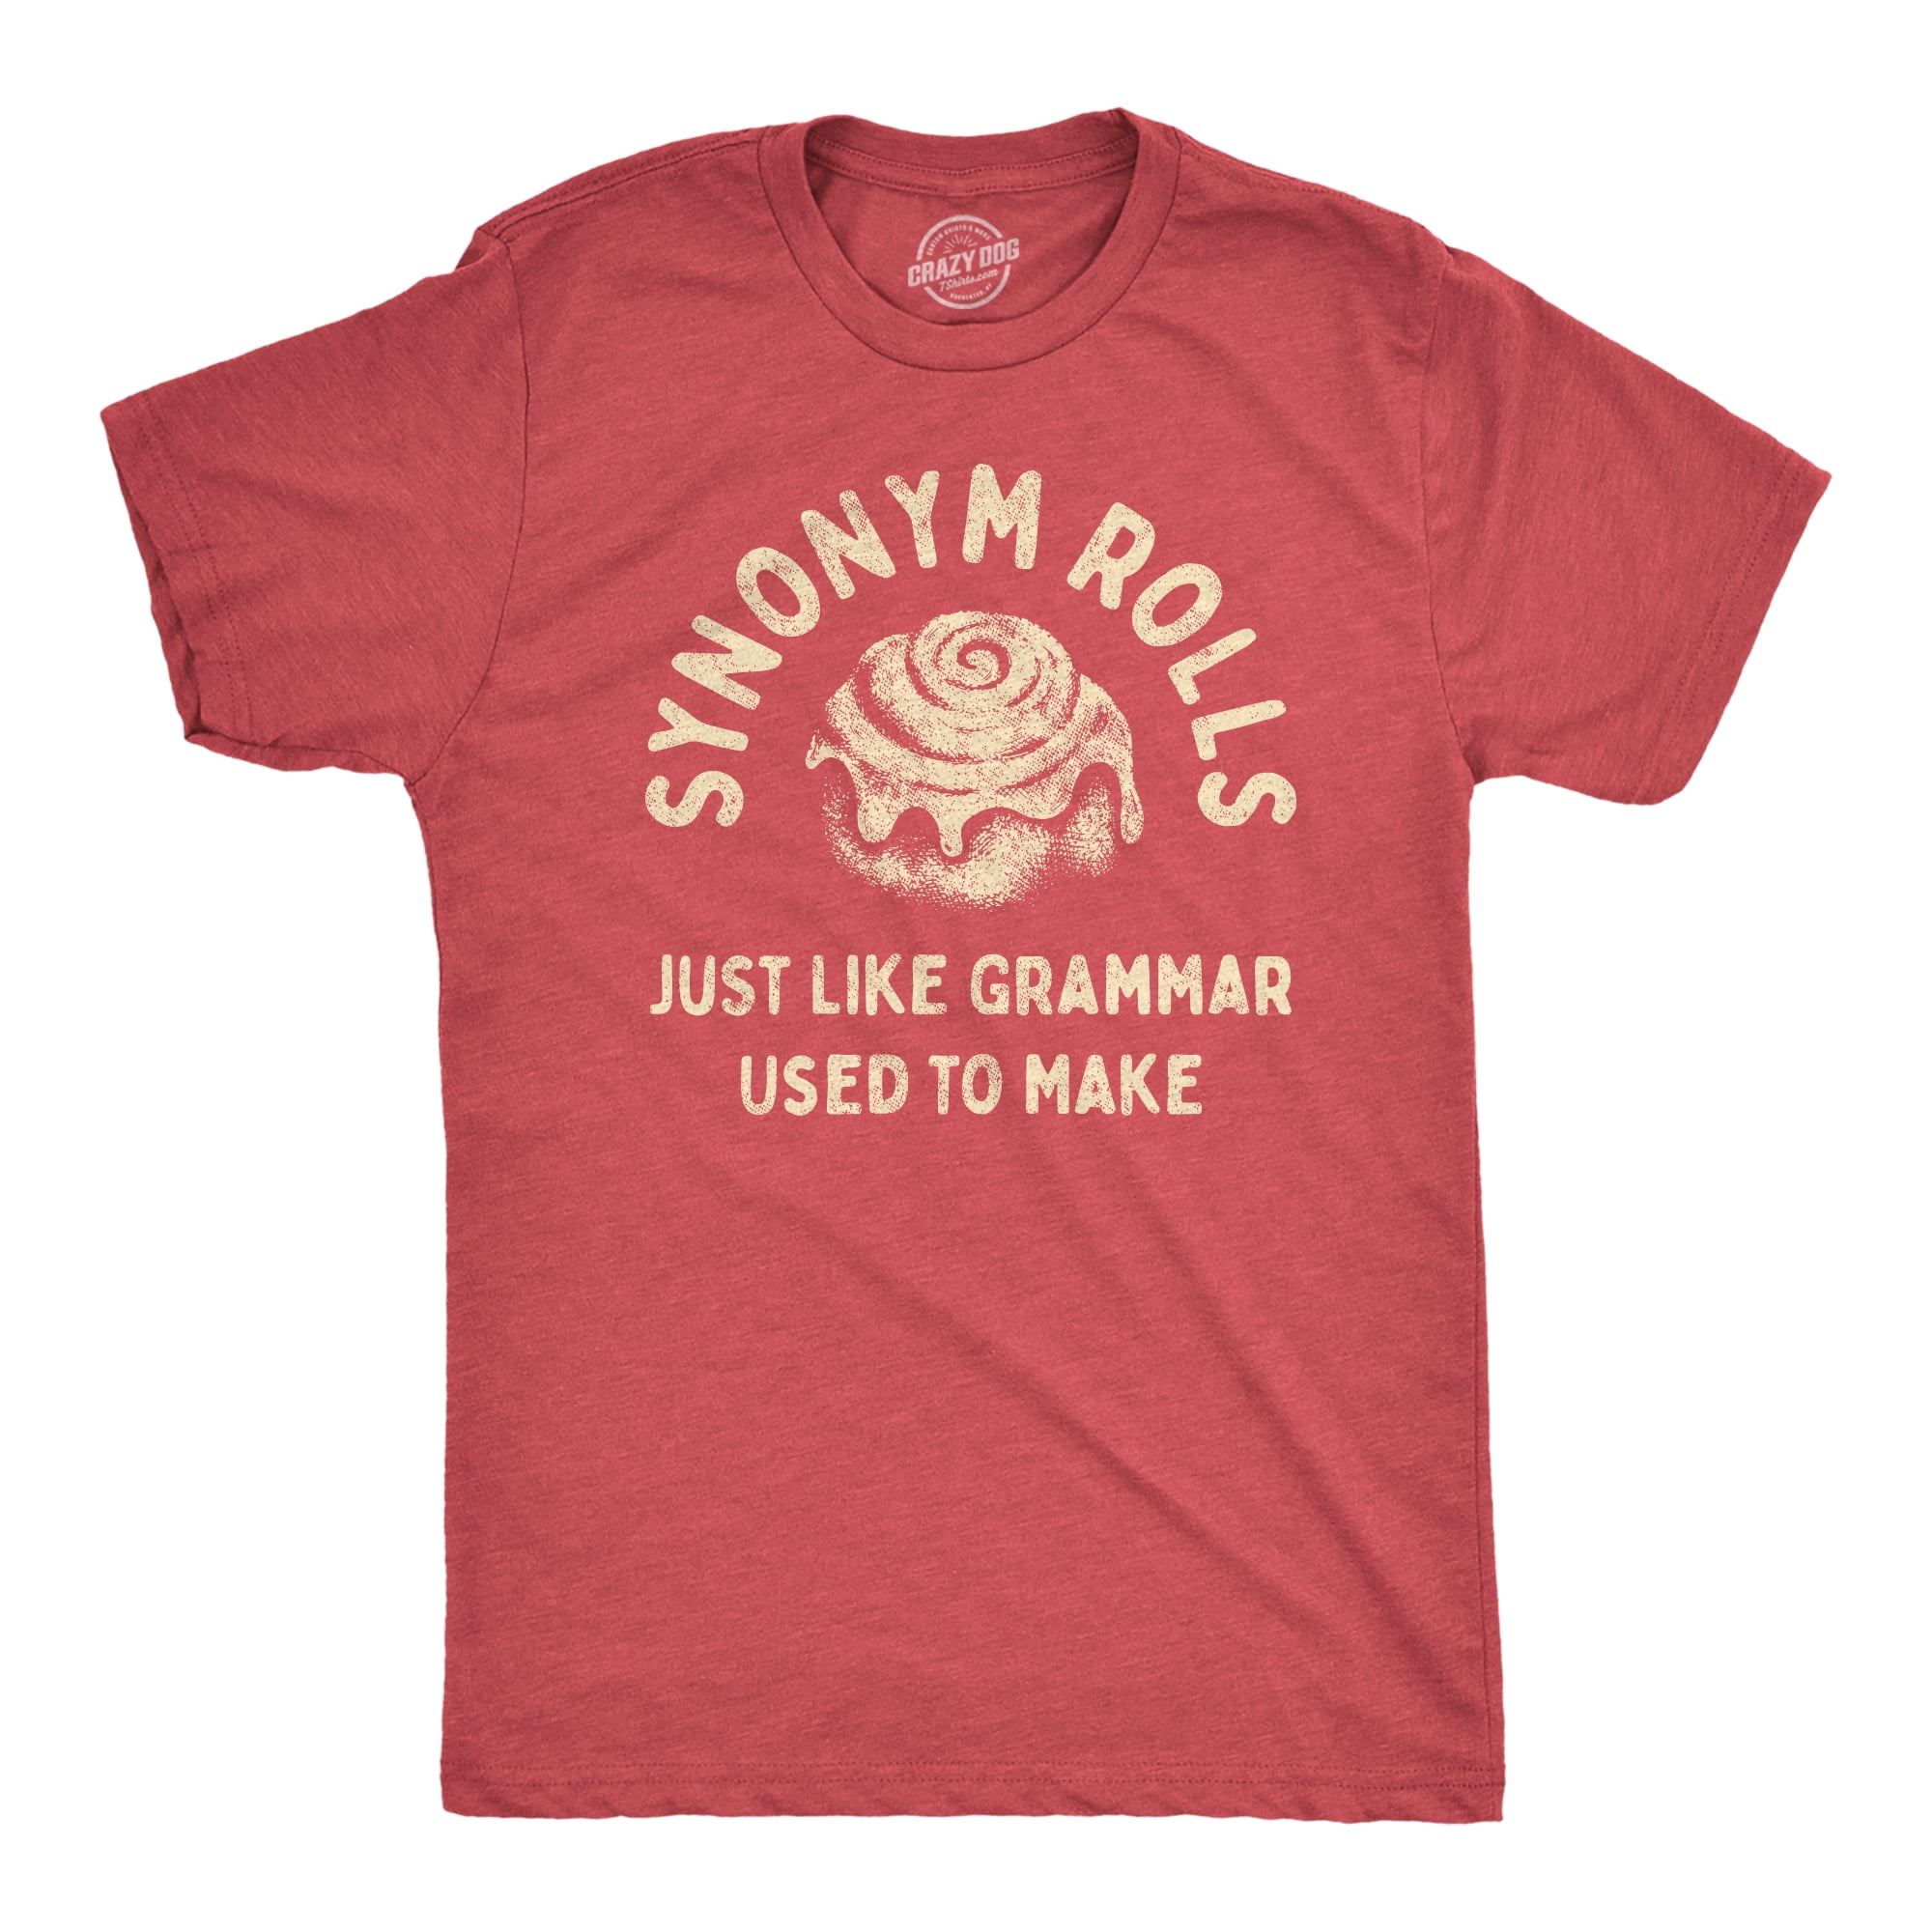 Mens Synonym Rolls Just Grammar Used To Make T Shirt Funny Cinnamon Roll Joke Graphic Tee For Guys (Heather Red) - S Graphic - Walmart.com